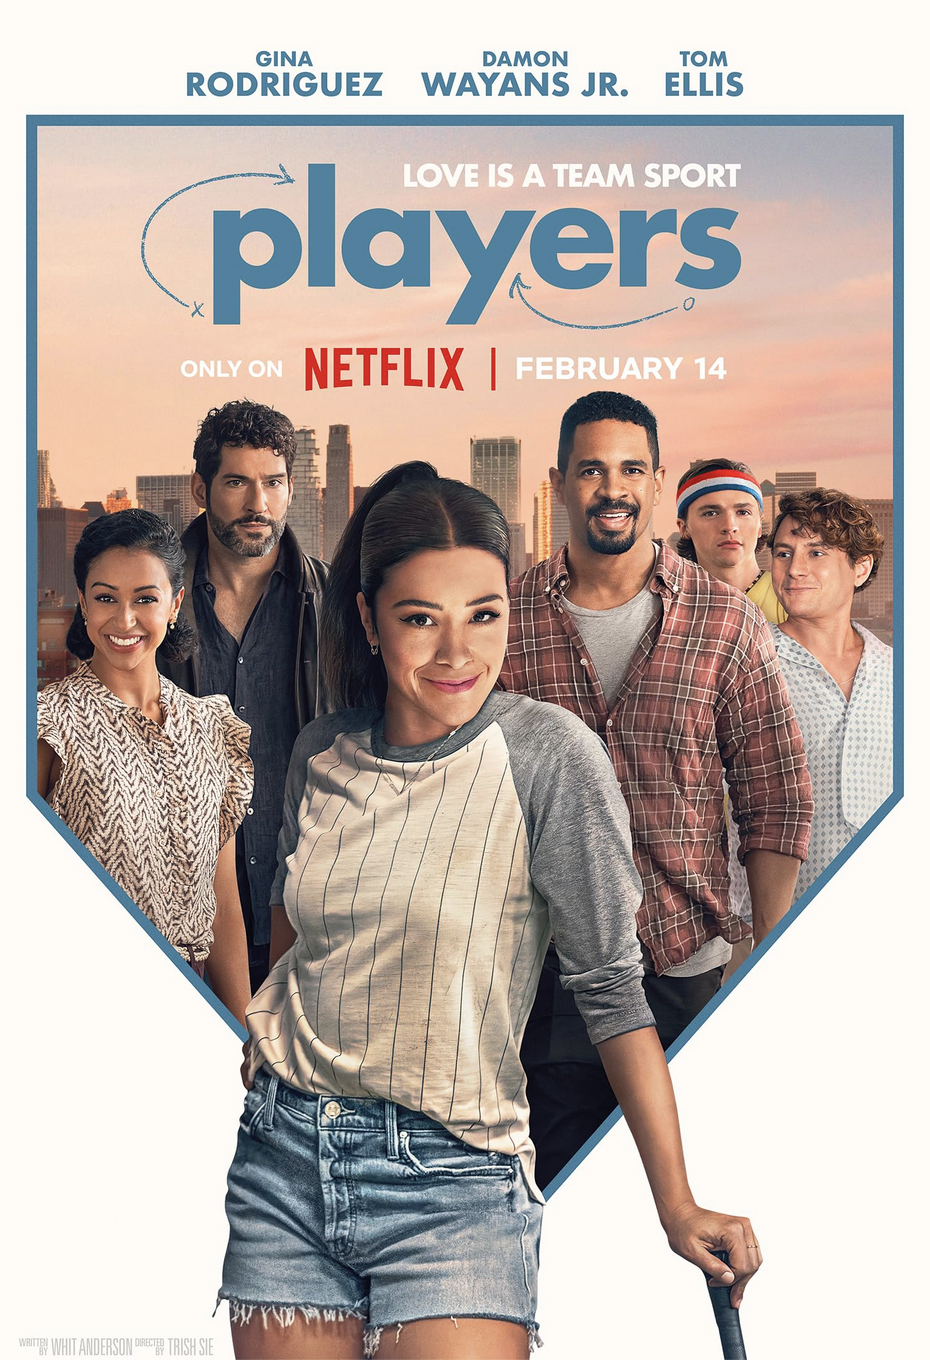 Mack in a baseball-style shirt leaning on a bat standing in front of a baseball diamond-shaped outline around the rest of the cast. The text has Gina Rodriguez, Damon Wayans, Tom Ellis LOVE IS A TEAM SPORT PLAYERS ONLY ON NETFLIX FEBRUARY 14